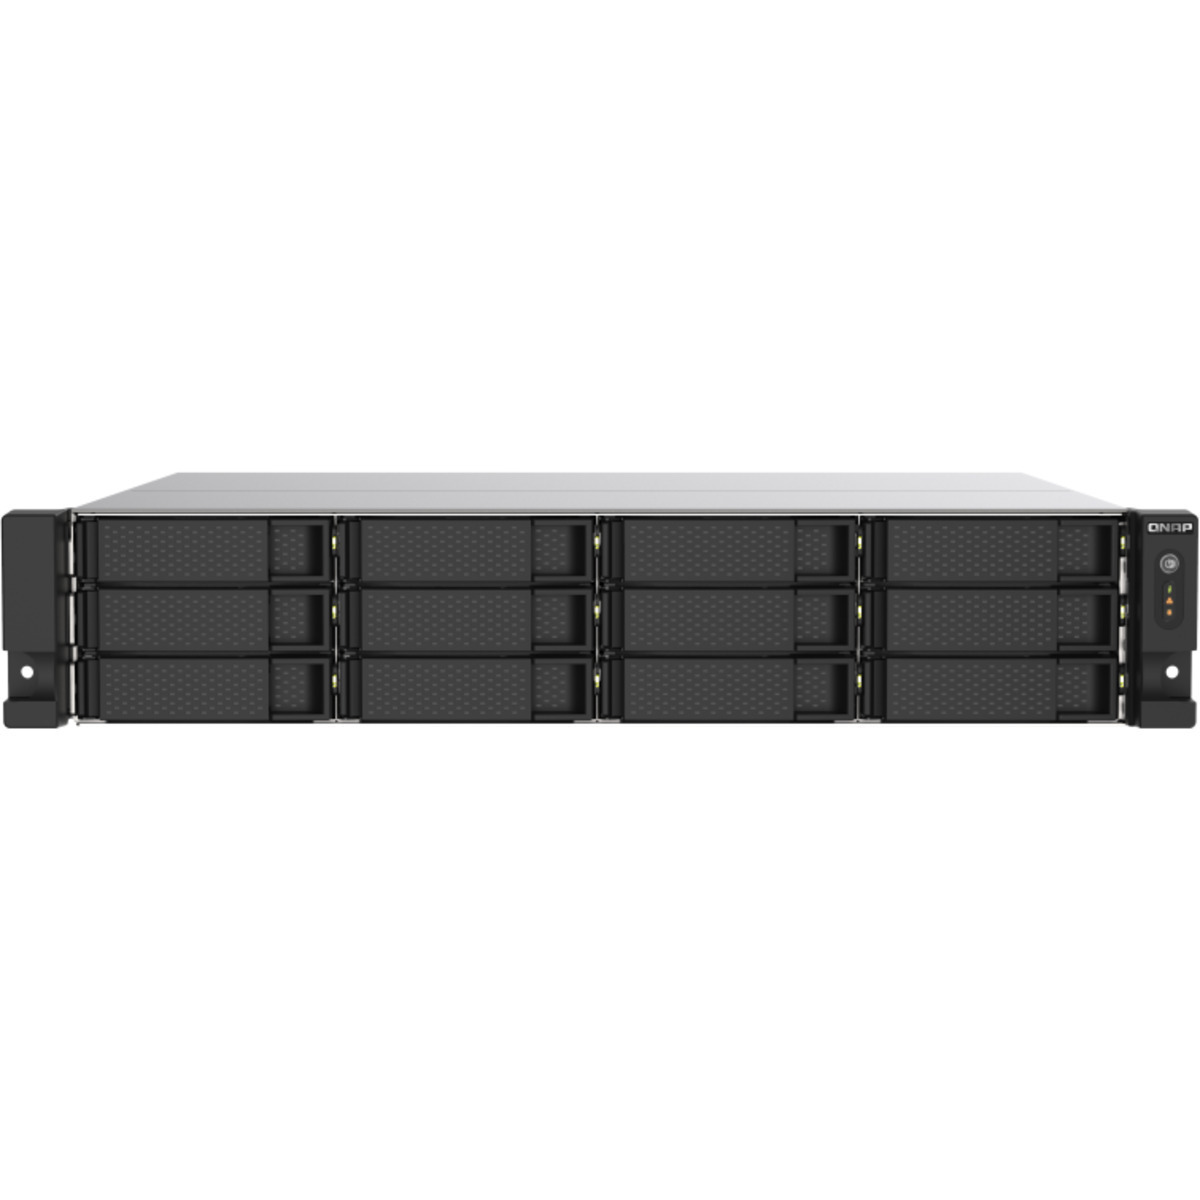 QNAP TS-1273AU-RP 44tb 12-Bay RackMount Multimedia / Power User / Business NAS - Network Attached Storage Device 11x4tb Seagate EXOS 7E10 ST4000NM024B 3.5 7200rpm SATA 6Gb/s HDD ENTERPRISE Class Drives Installed - Burn-In Tested - FREE RAM UPGRADE TS-1273AU-RP